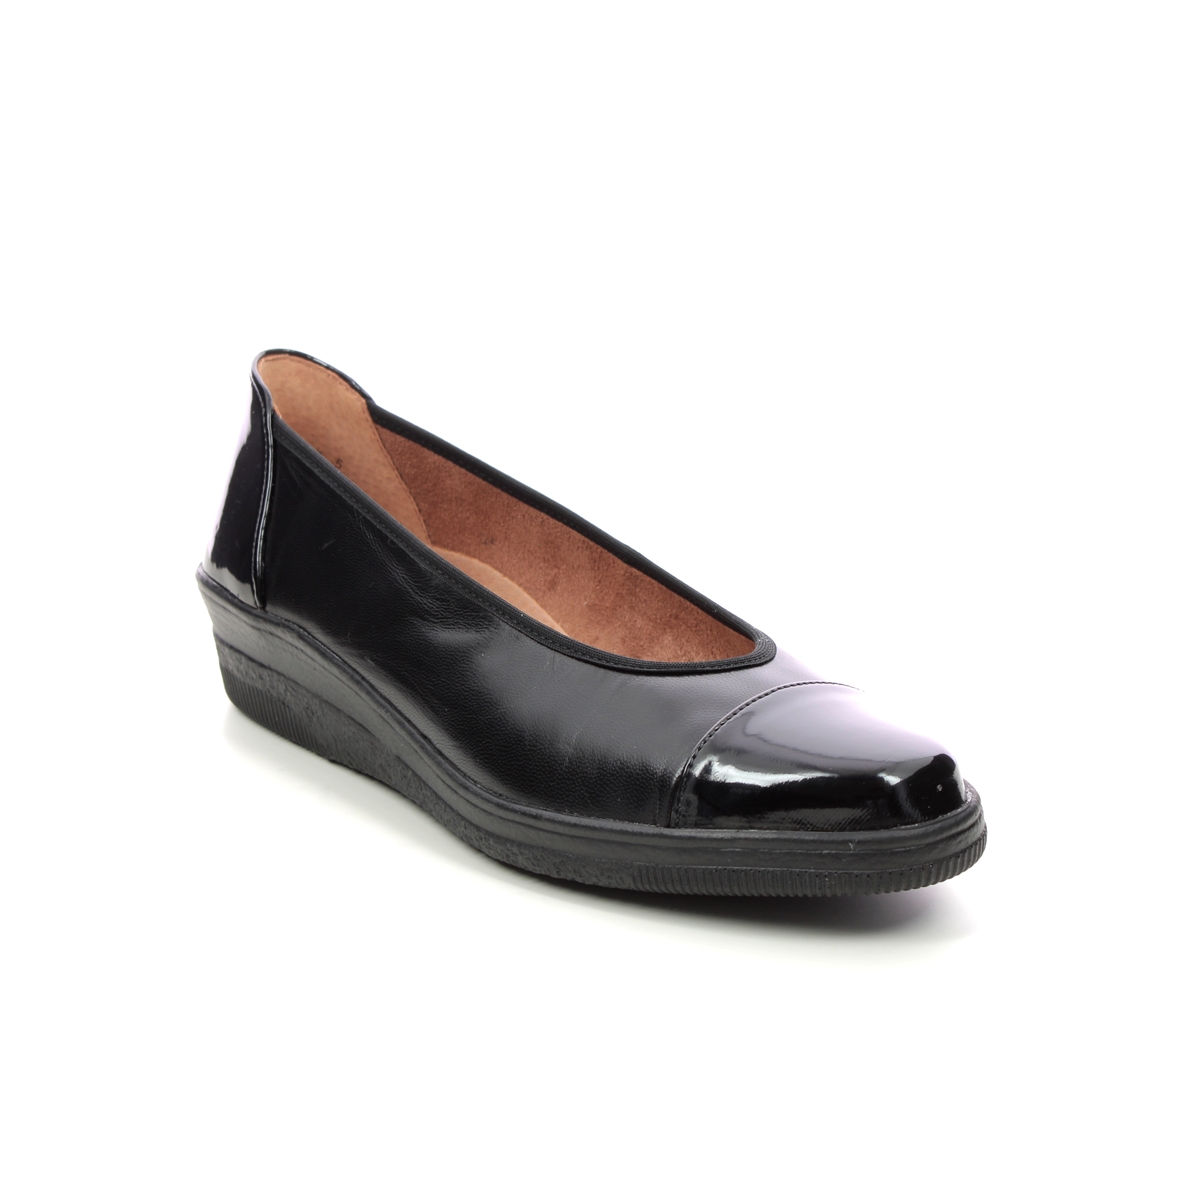 Gabor Petunia Black Patent Leather Womens Comfort Slip On Shoes 06.402.37